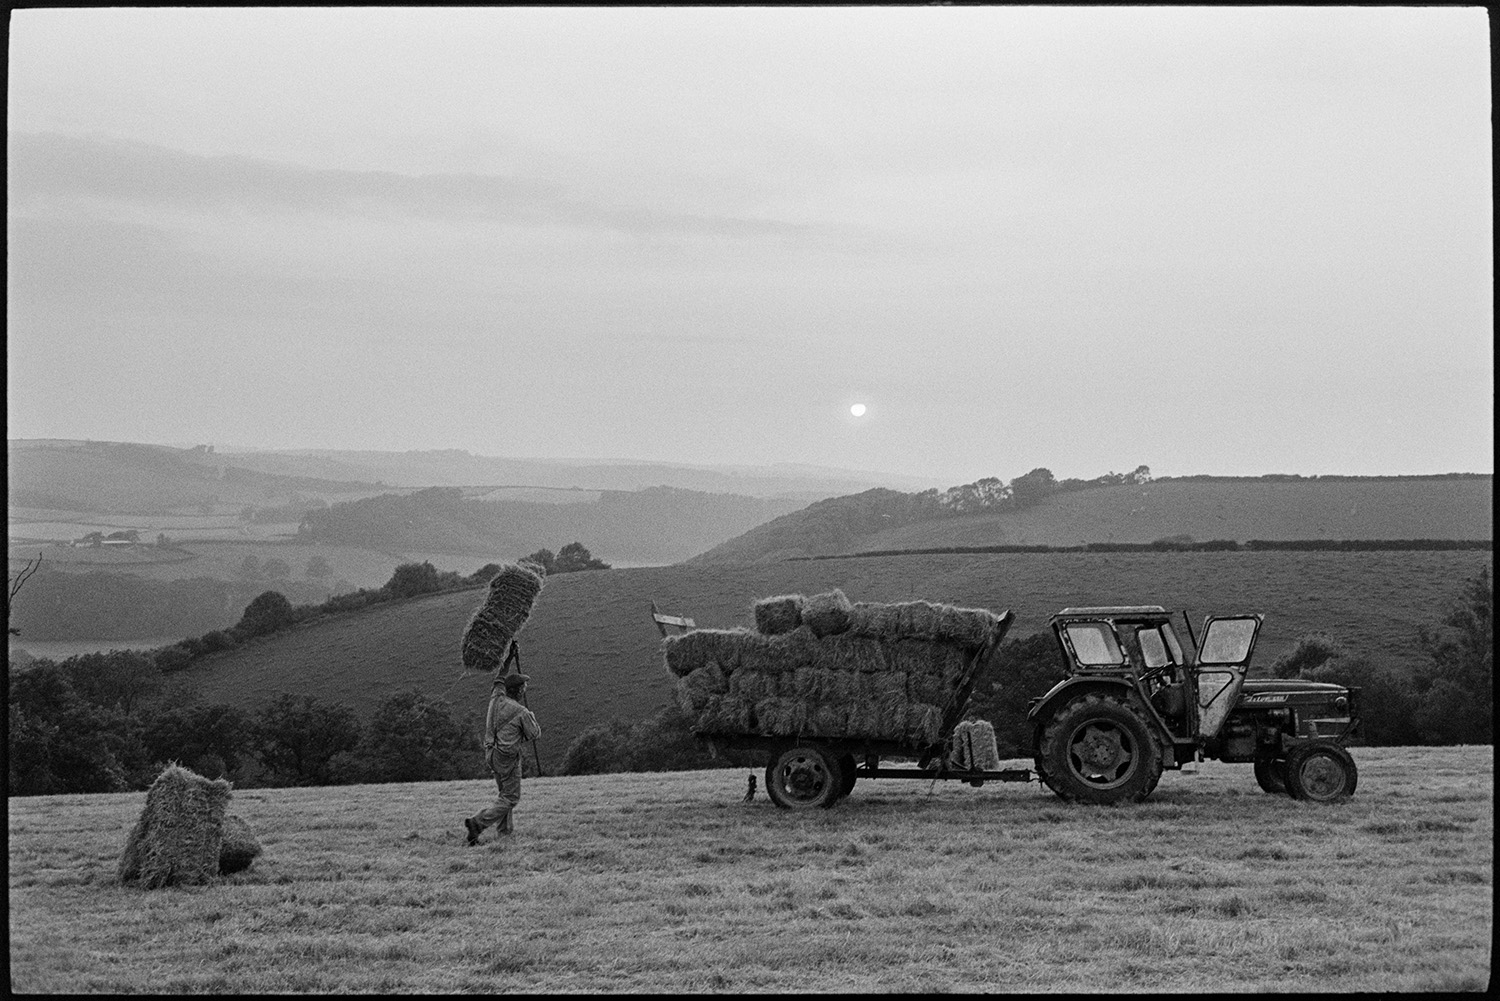 Farmer loading hay bales onto trailer, evening. 
[George Ayre loading hay bales onto a tractor and trailer in a field at Ashwell, Dolton, in the evening. He is carrying a hay bale above his head using a pitchfork. Fields can be seen on a hillside in the background.]